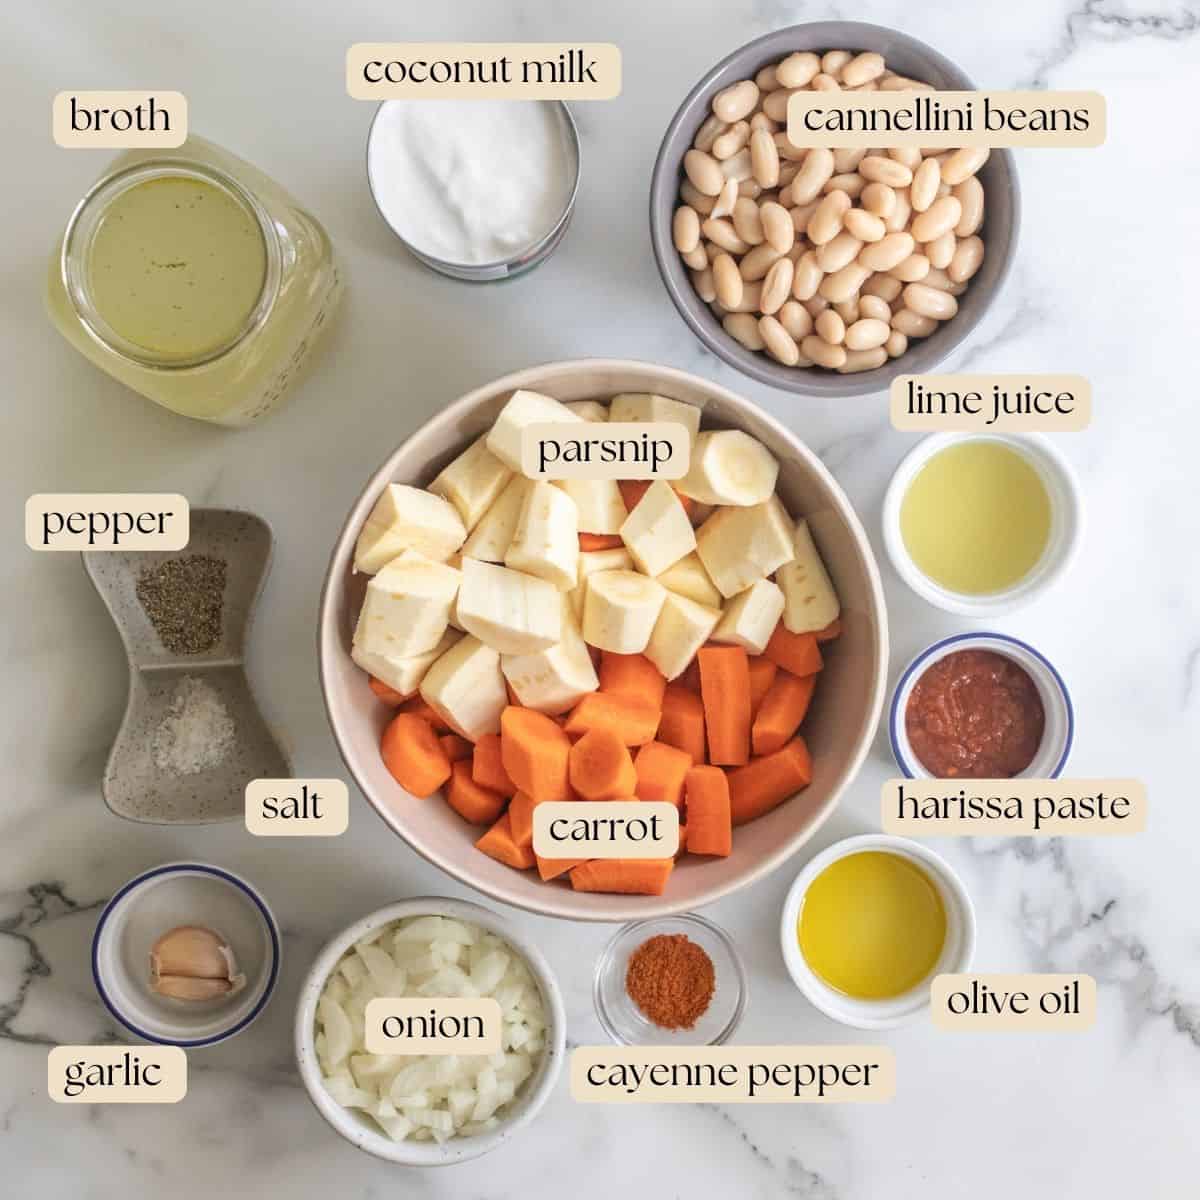 Ingredients to make cream carrot and parsnip soup in bowls on a countertop.